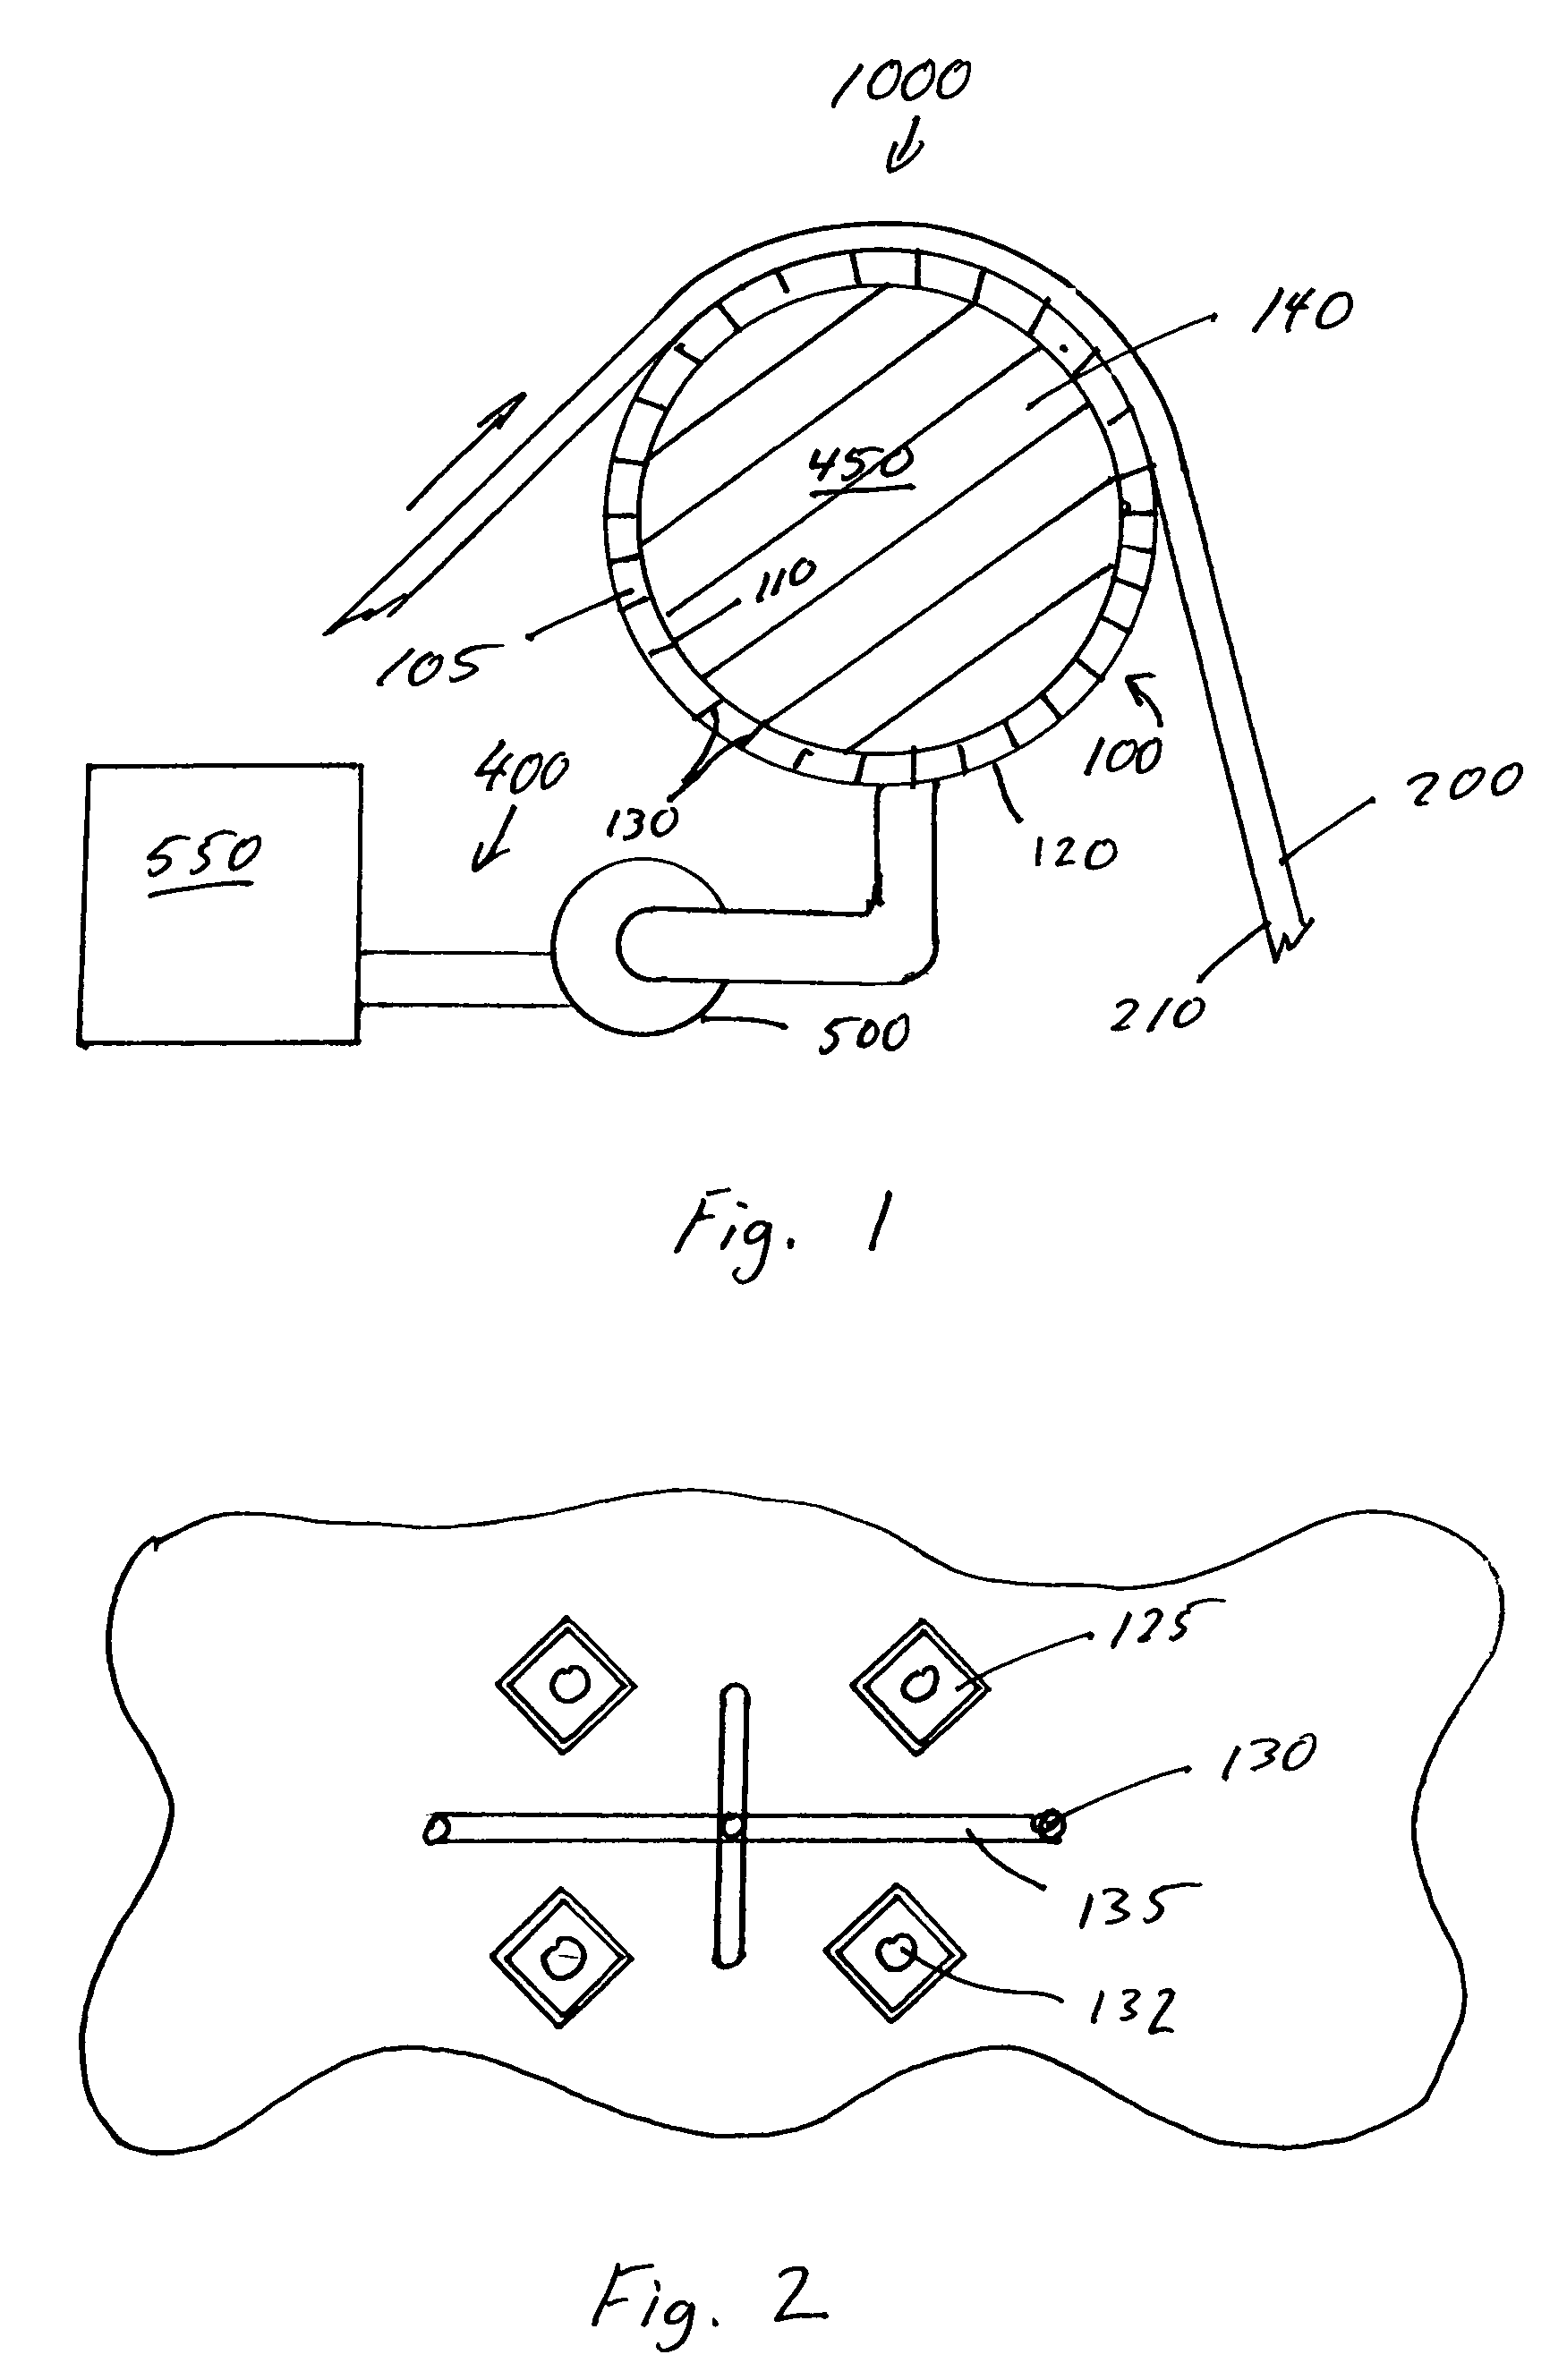 Apparatus and method for the transfer of a fluid to a moving web material